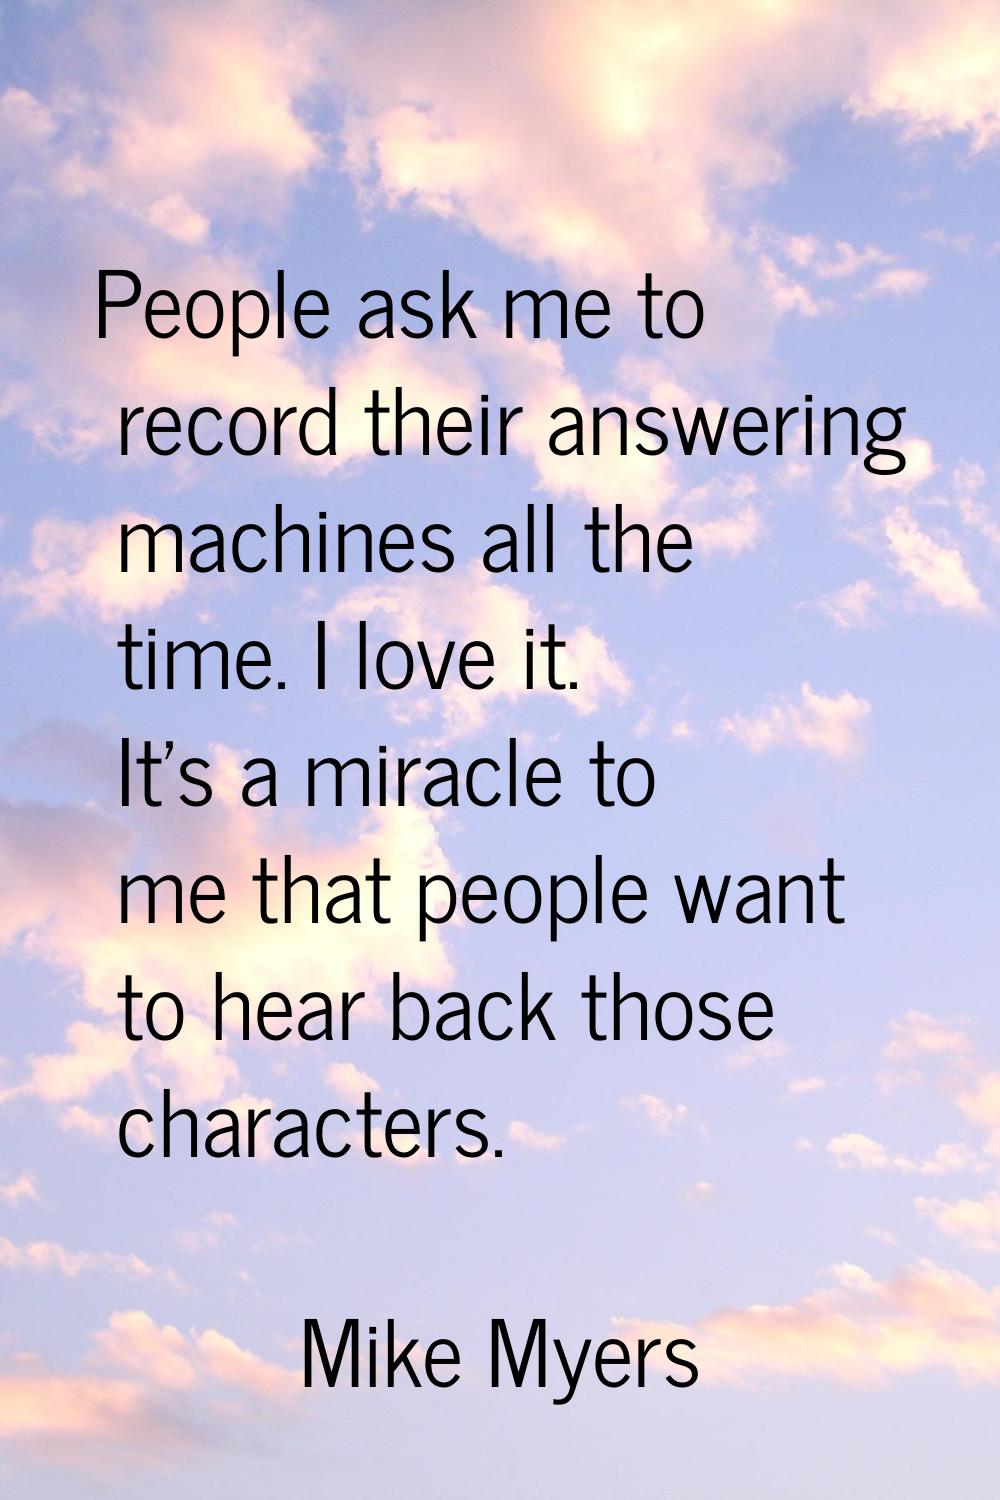 People ask me to record their answering machines all the time. I love it. It's a miracle to me that